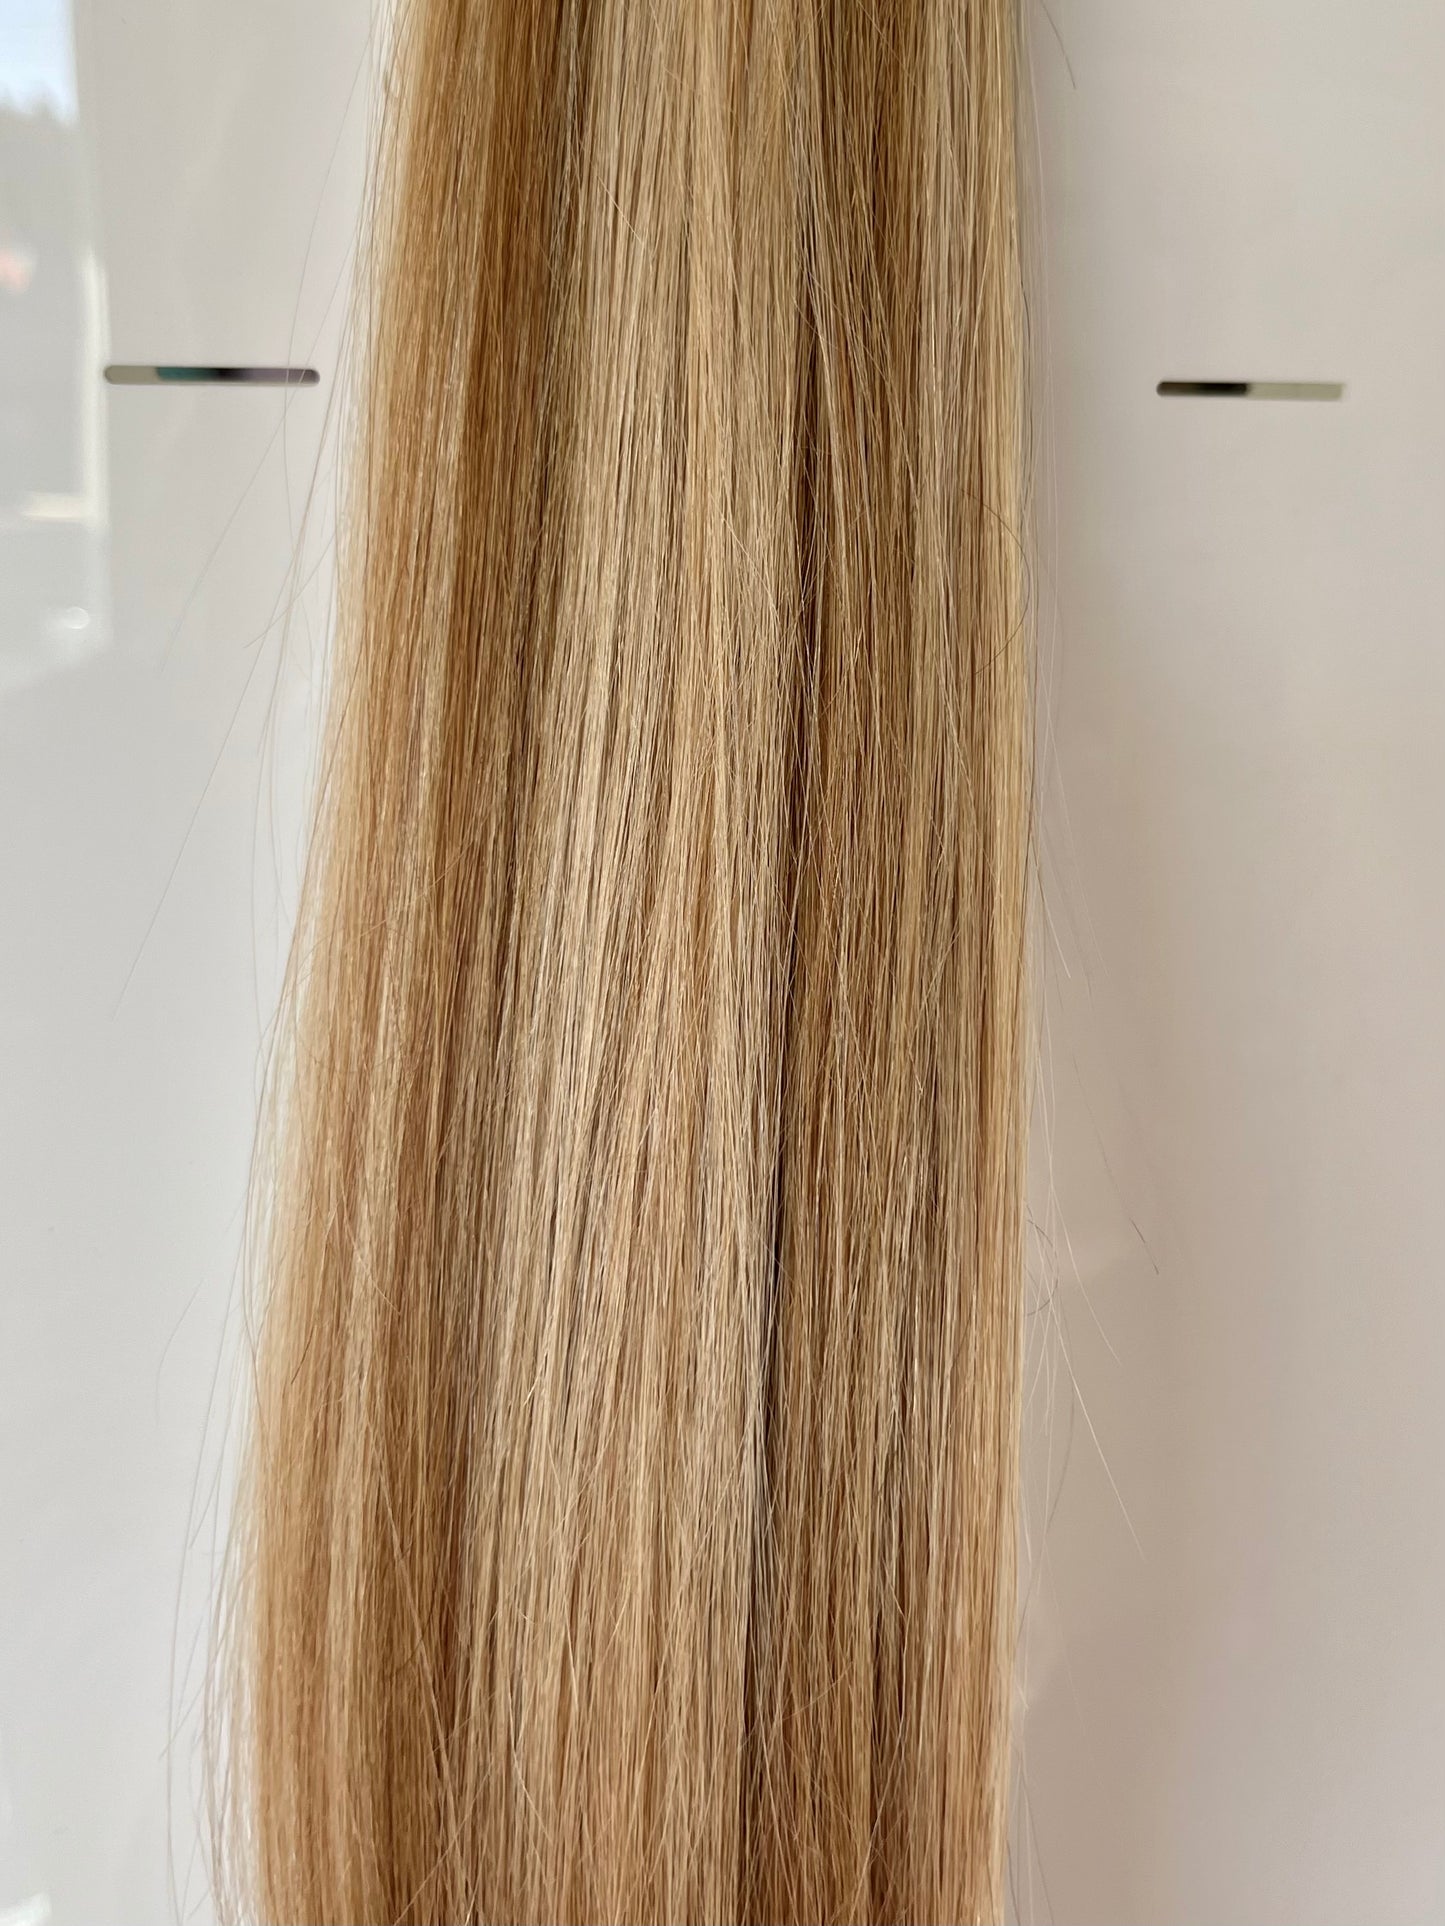 RETAIL HALO EXTENSIONS - HIGHLIGHTED - PARISIAN BLONDE